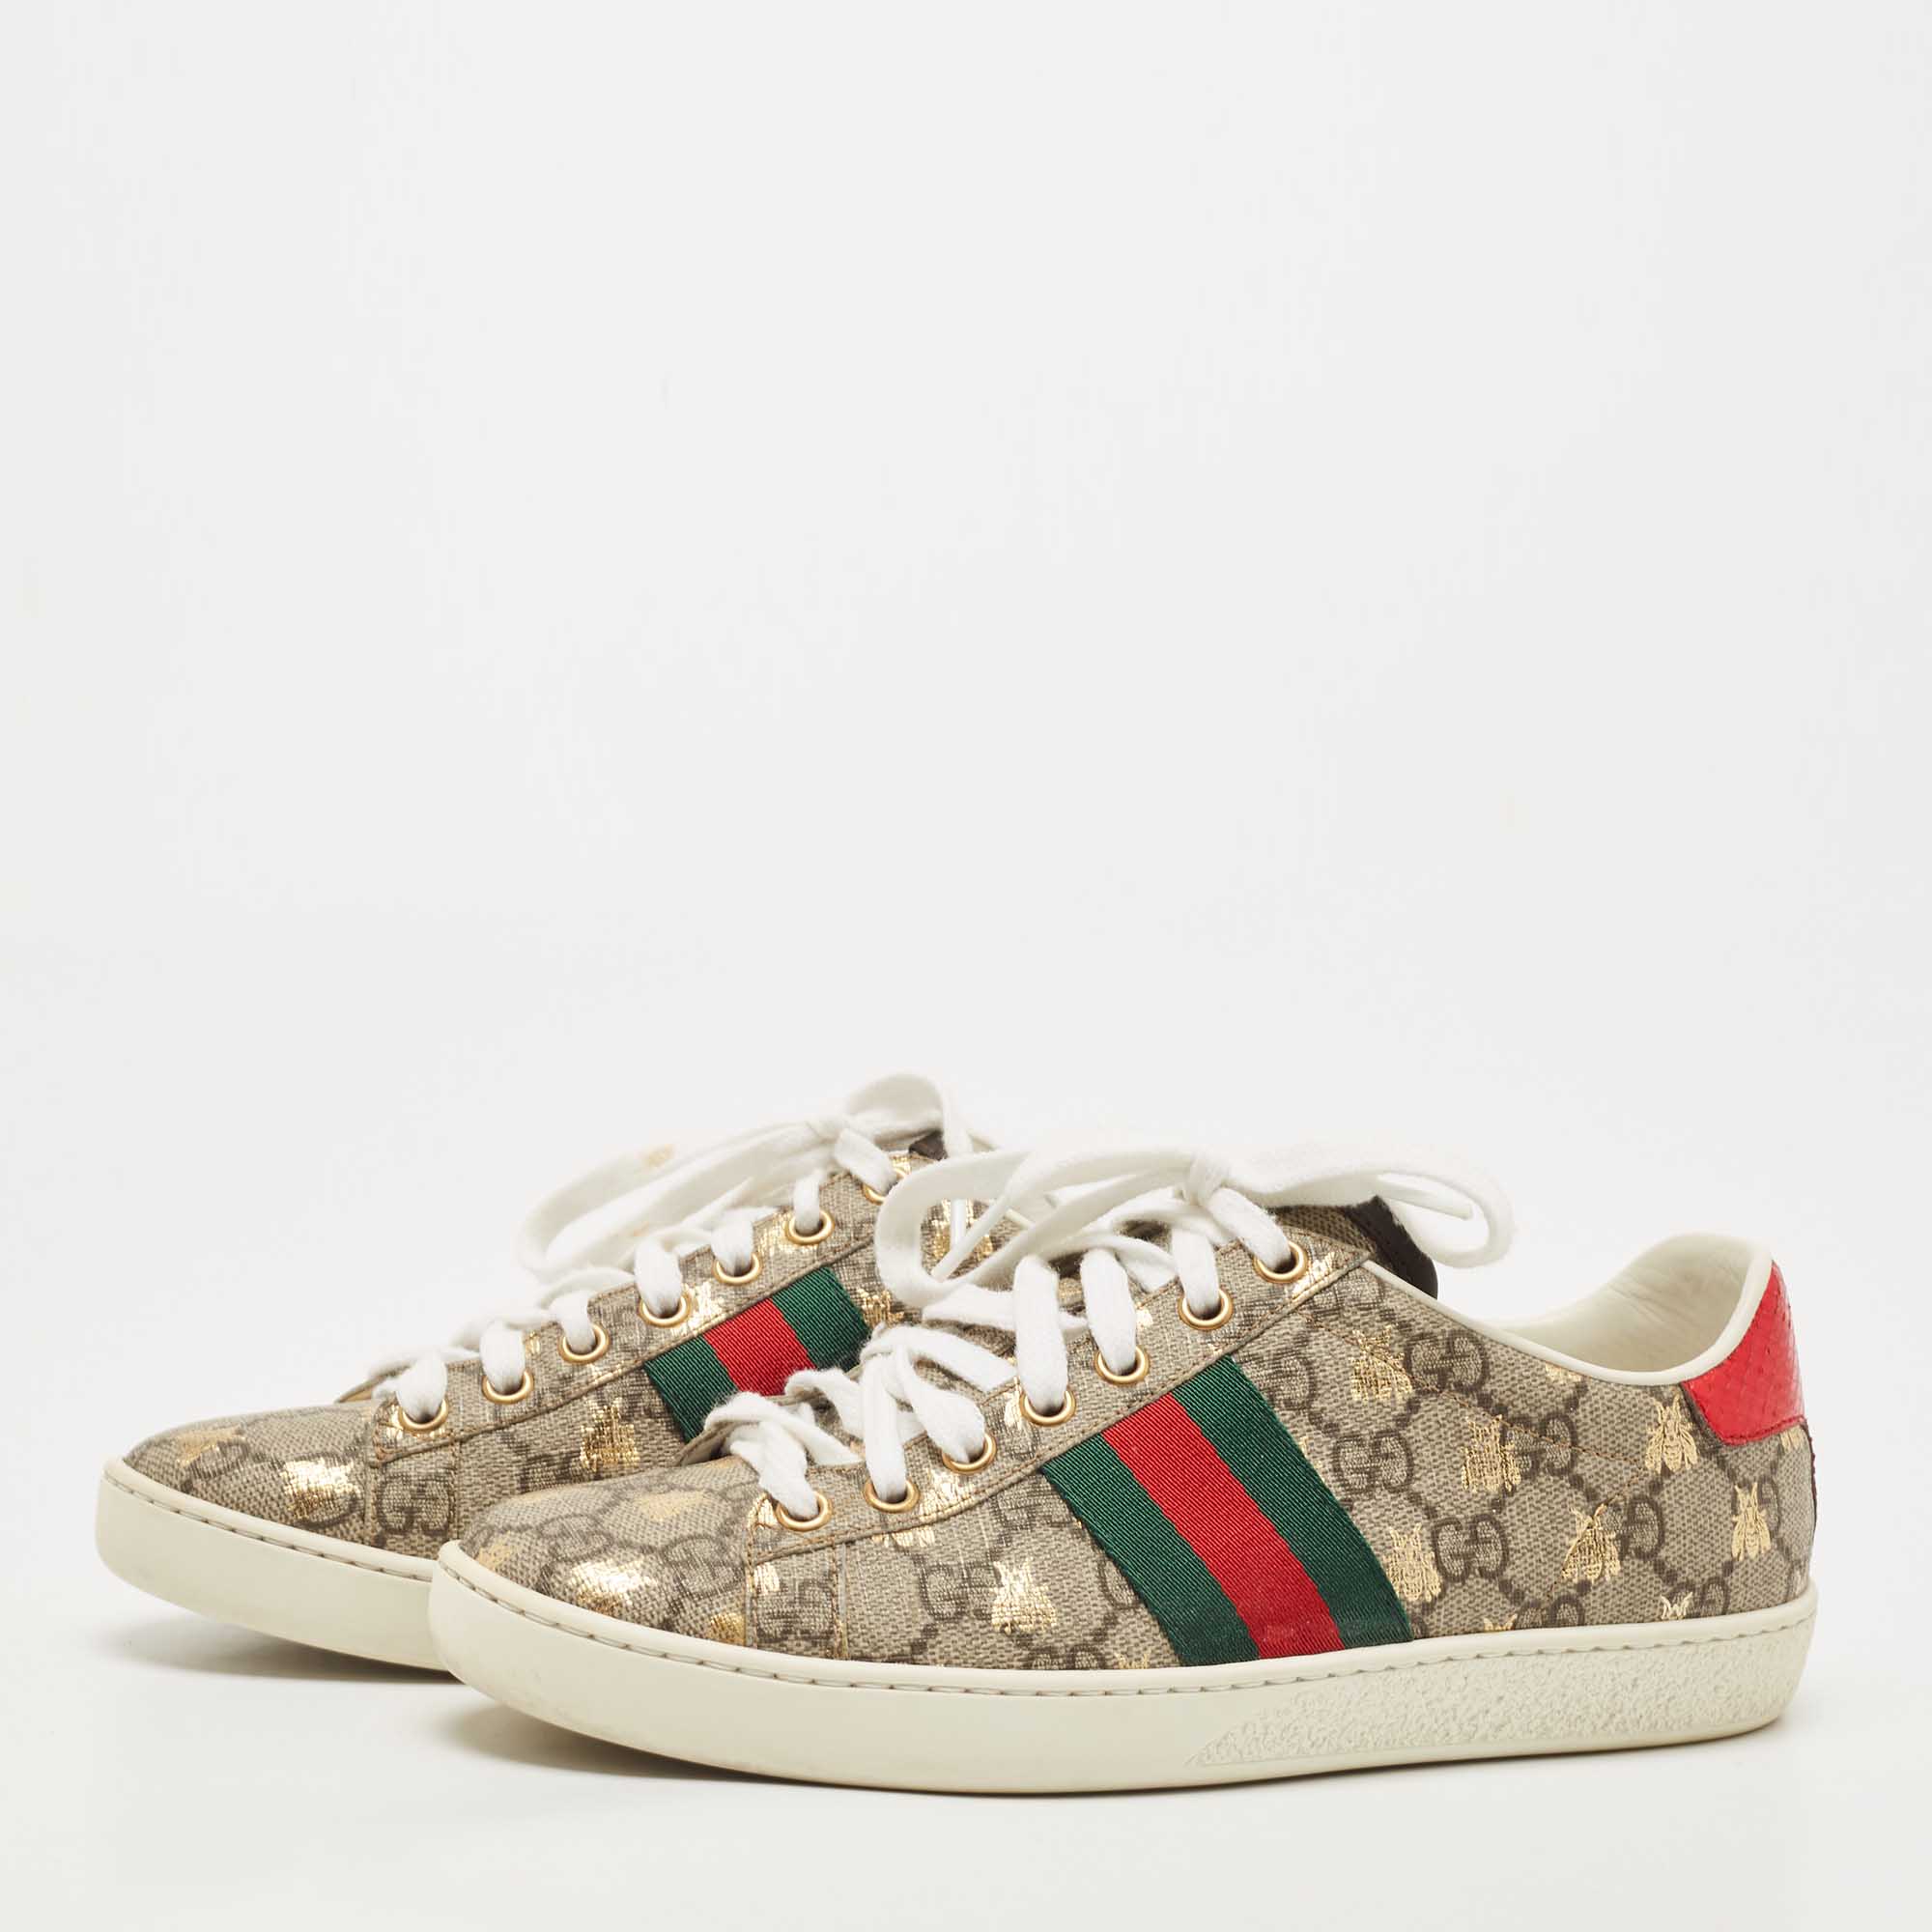 

Gucci Beige/Brown GG Supreme Canvas Printed Bee Ace Sneakers Size